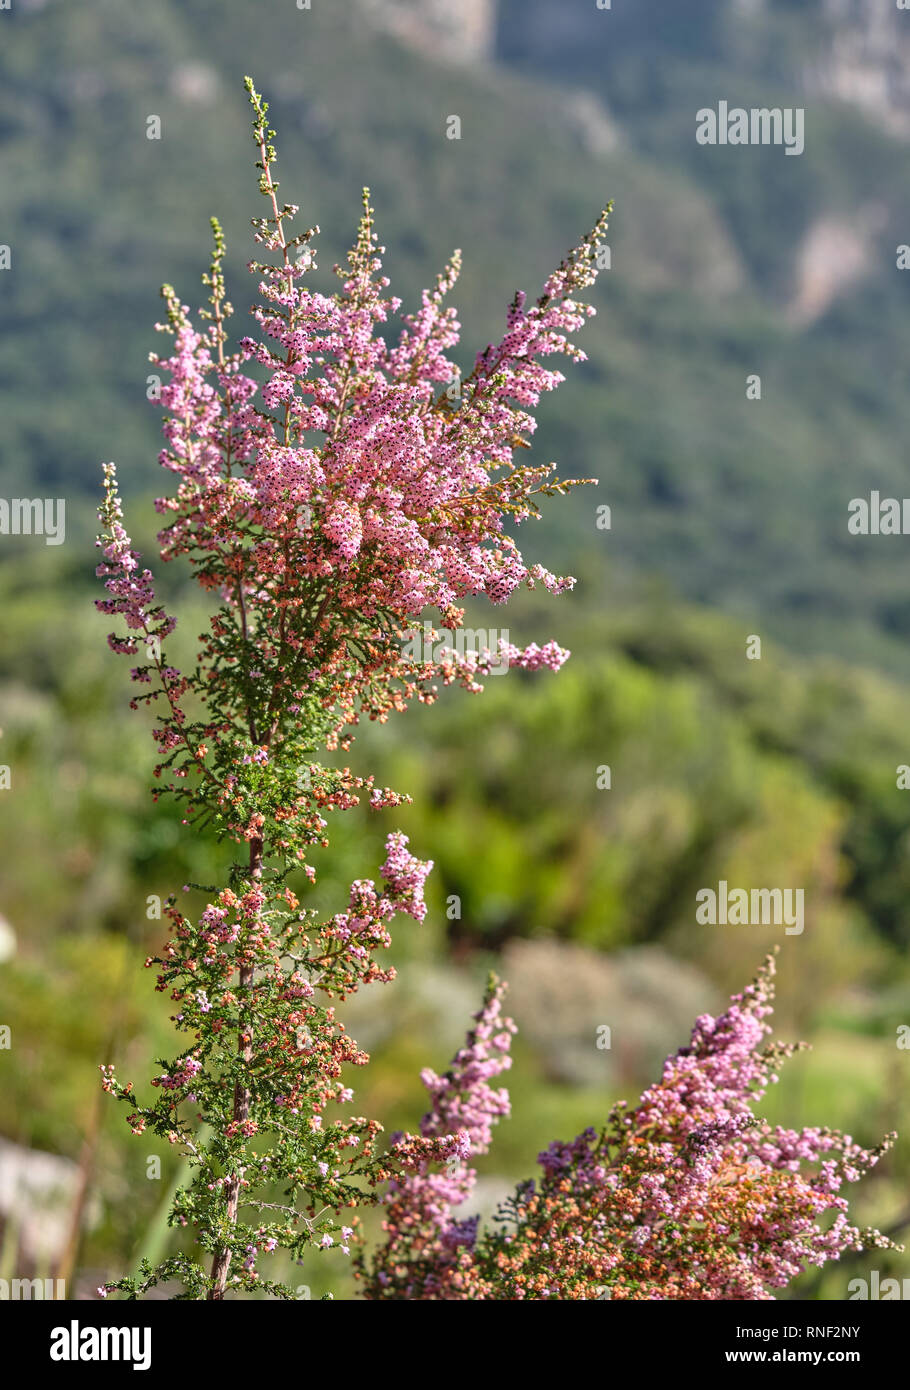 Pink-smoke heath (erica sparsa) bush in bloom with forest blurred background Stock Photo